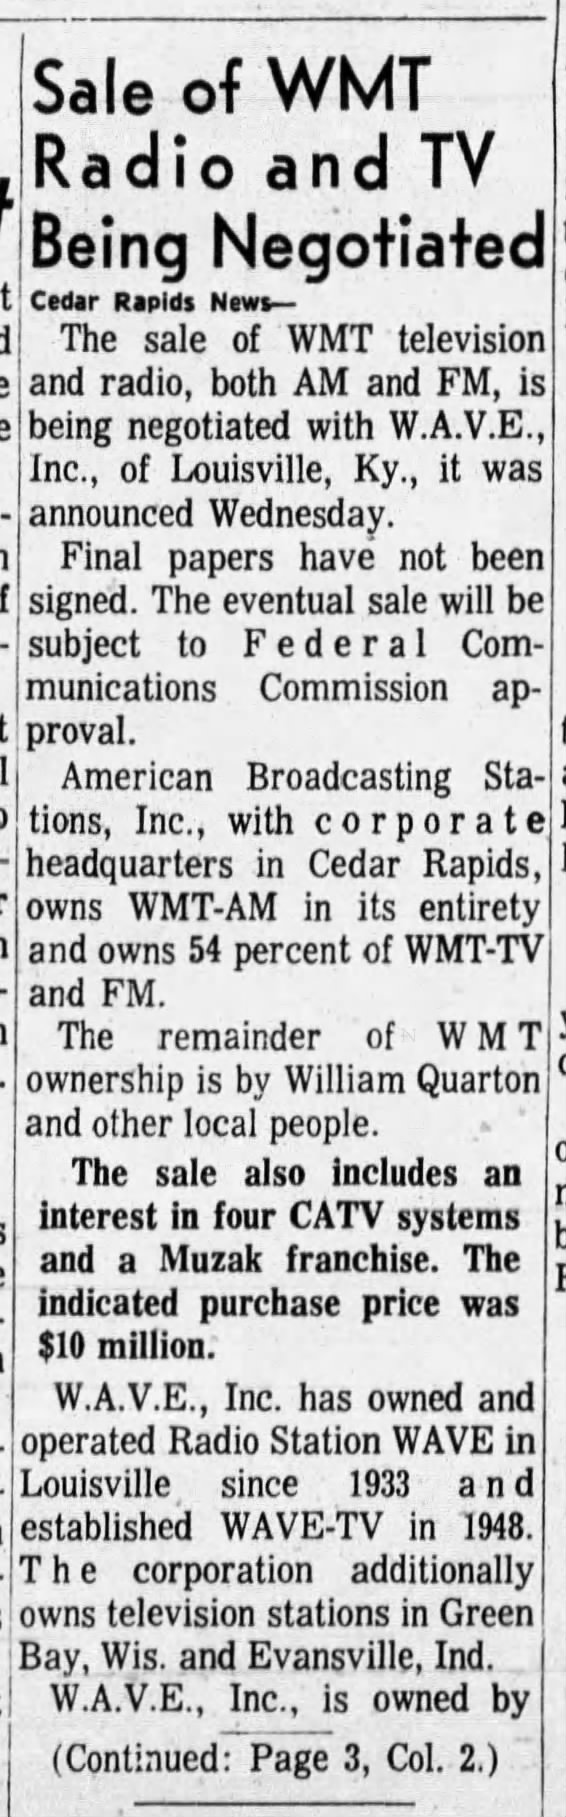 Sale of WMT Radio and TV Being Negotiated